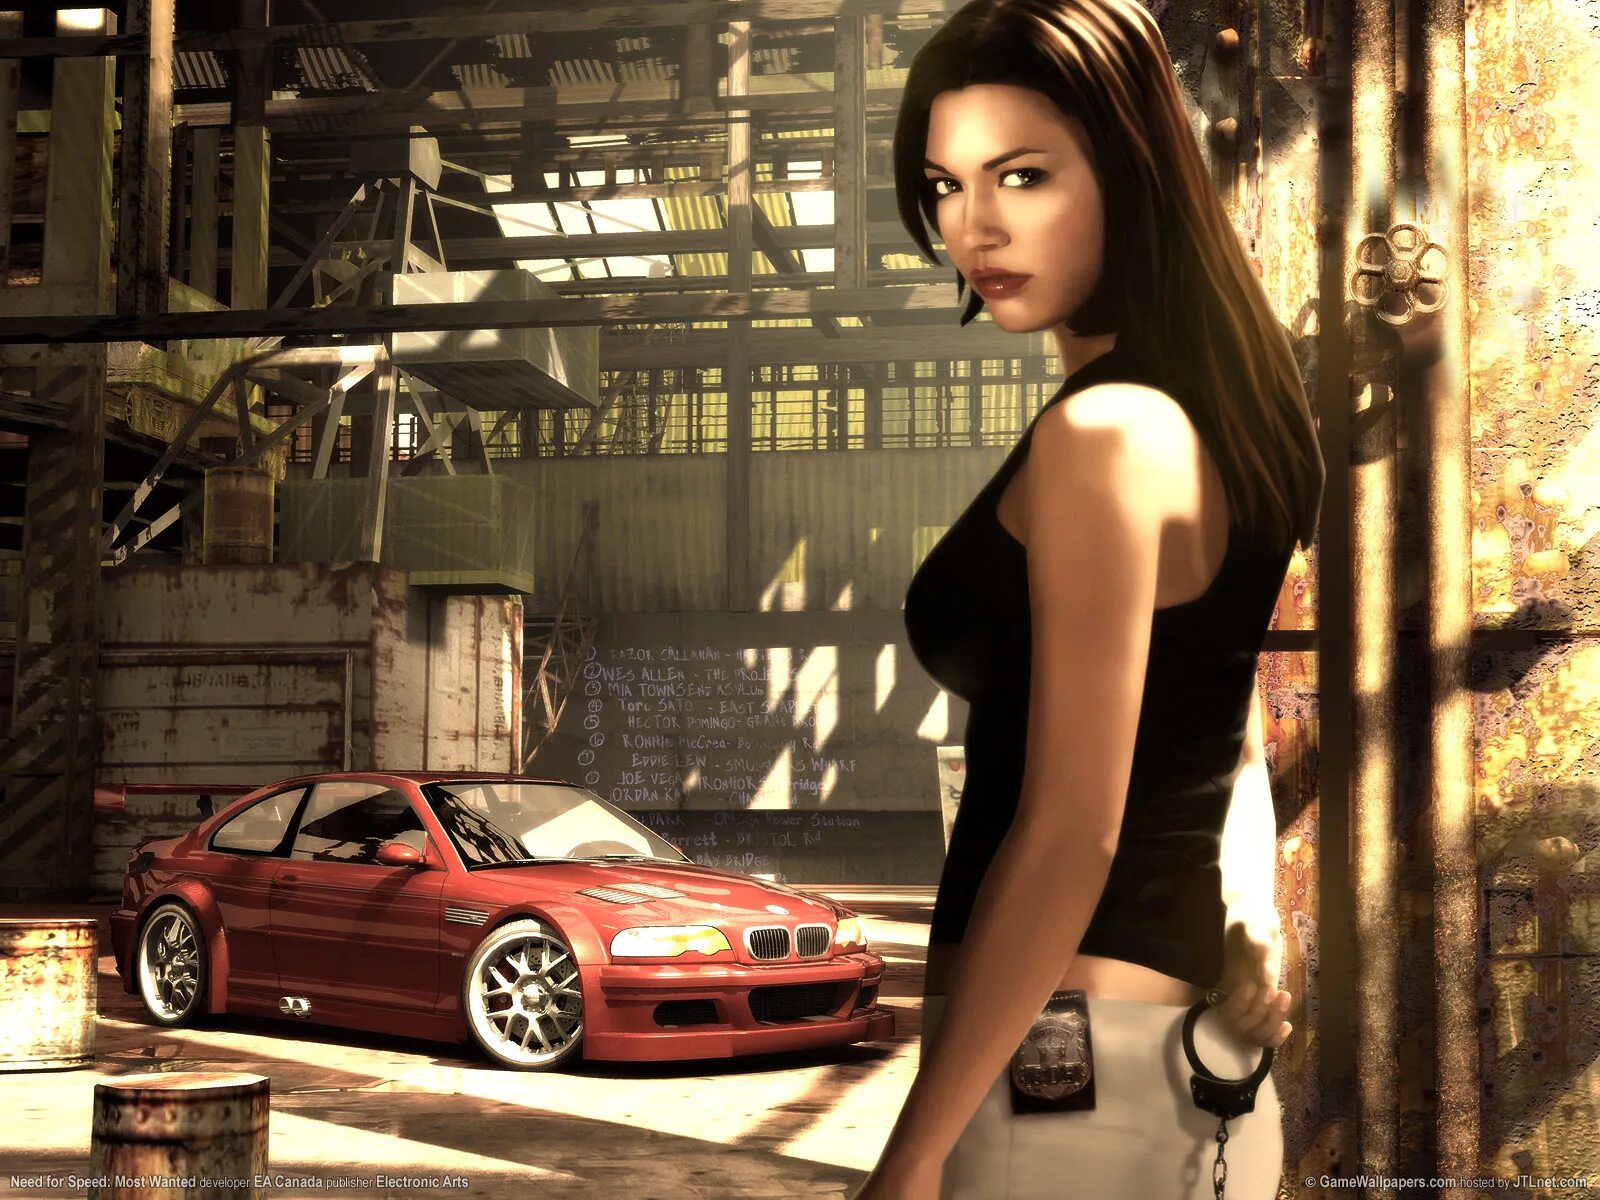 Need download. Миа из нфс. NFS most wanted 2005 девушки. Девушка из нид фор СПИД мост вантед. Нфс most wanted.